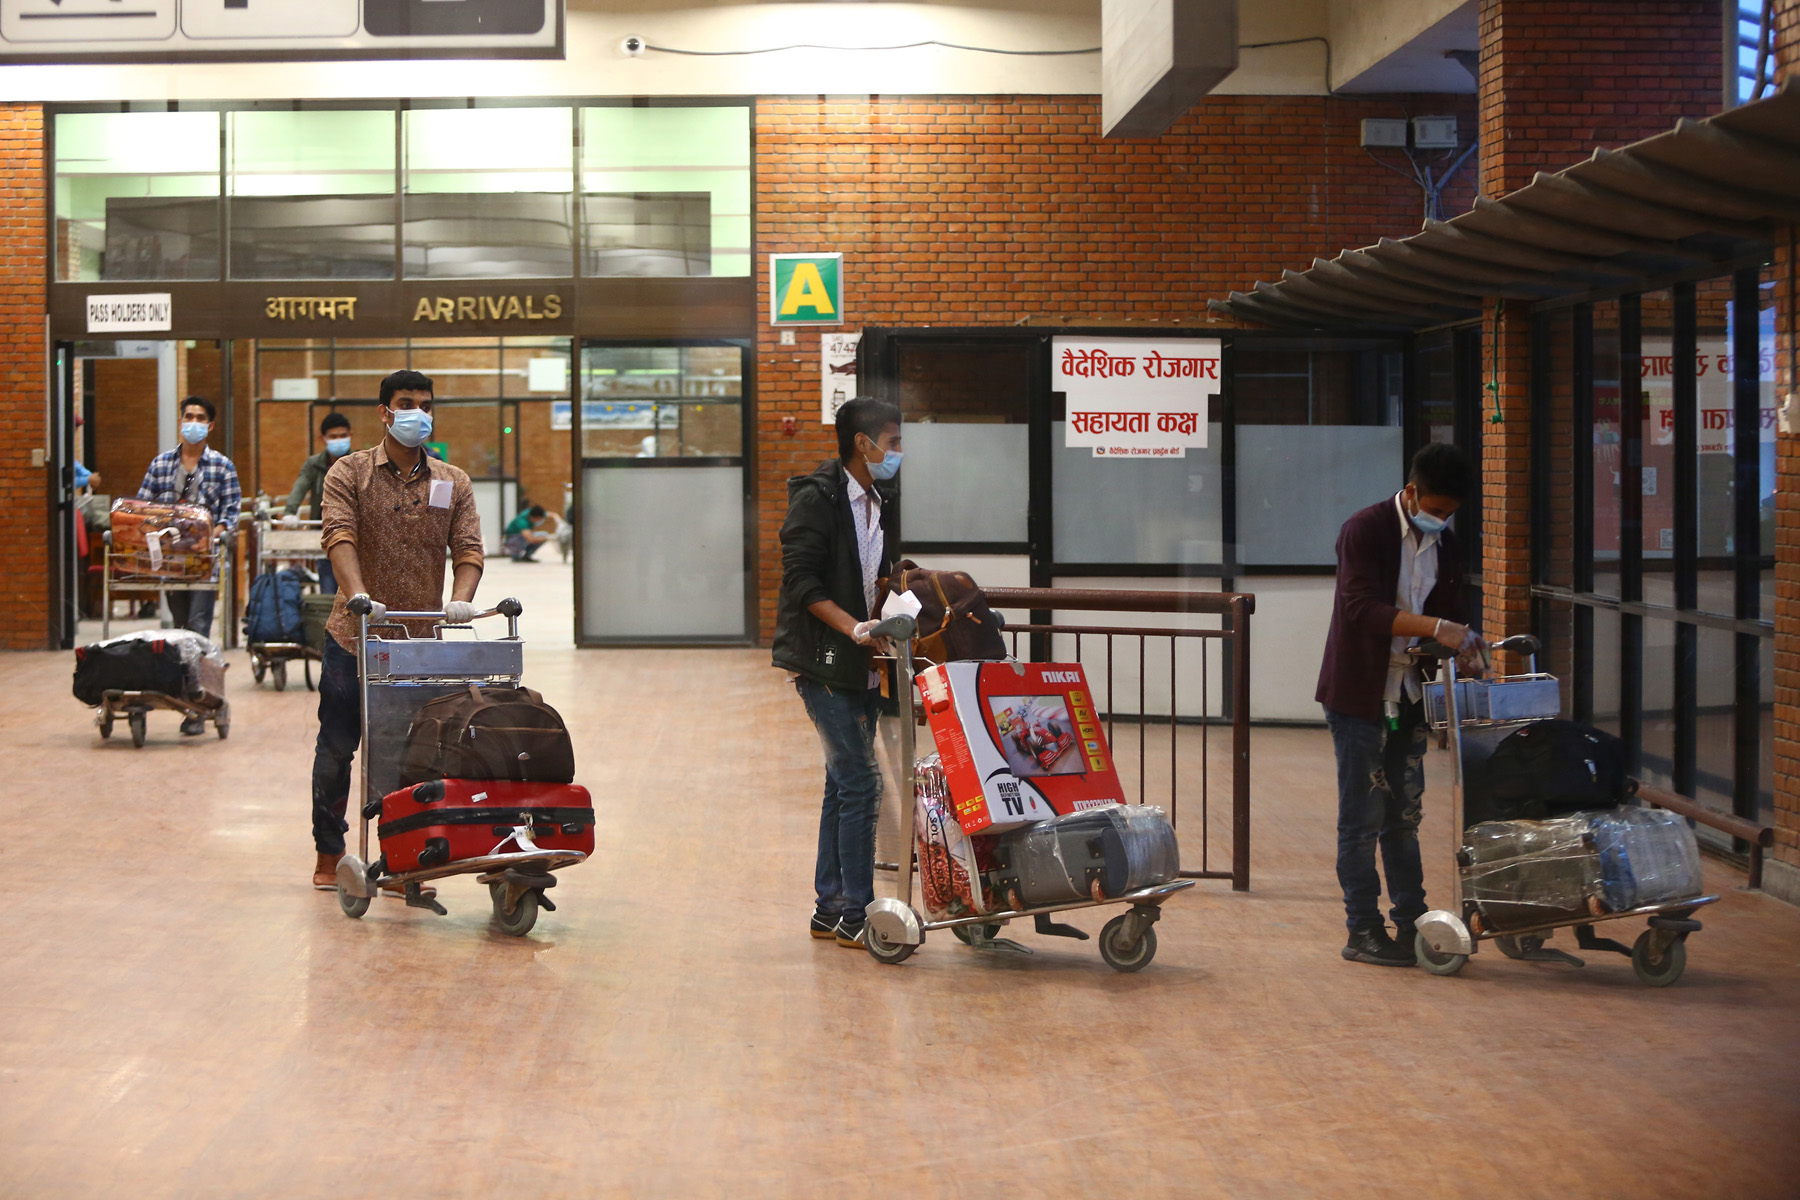 Over 1,000 stranded Nepalis return home from abroad